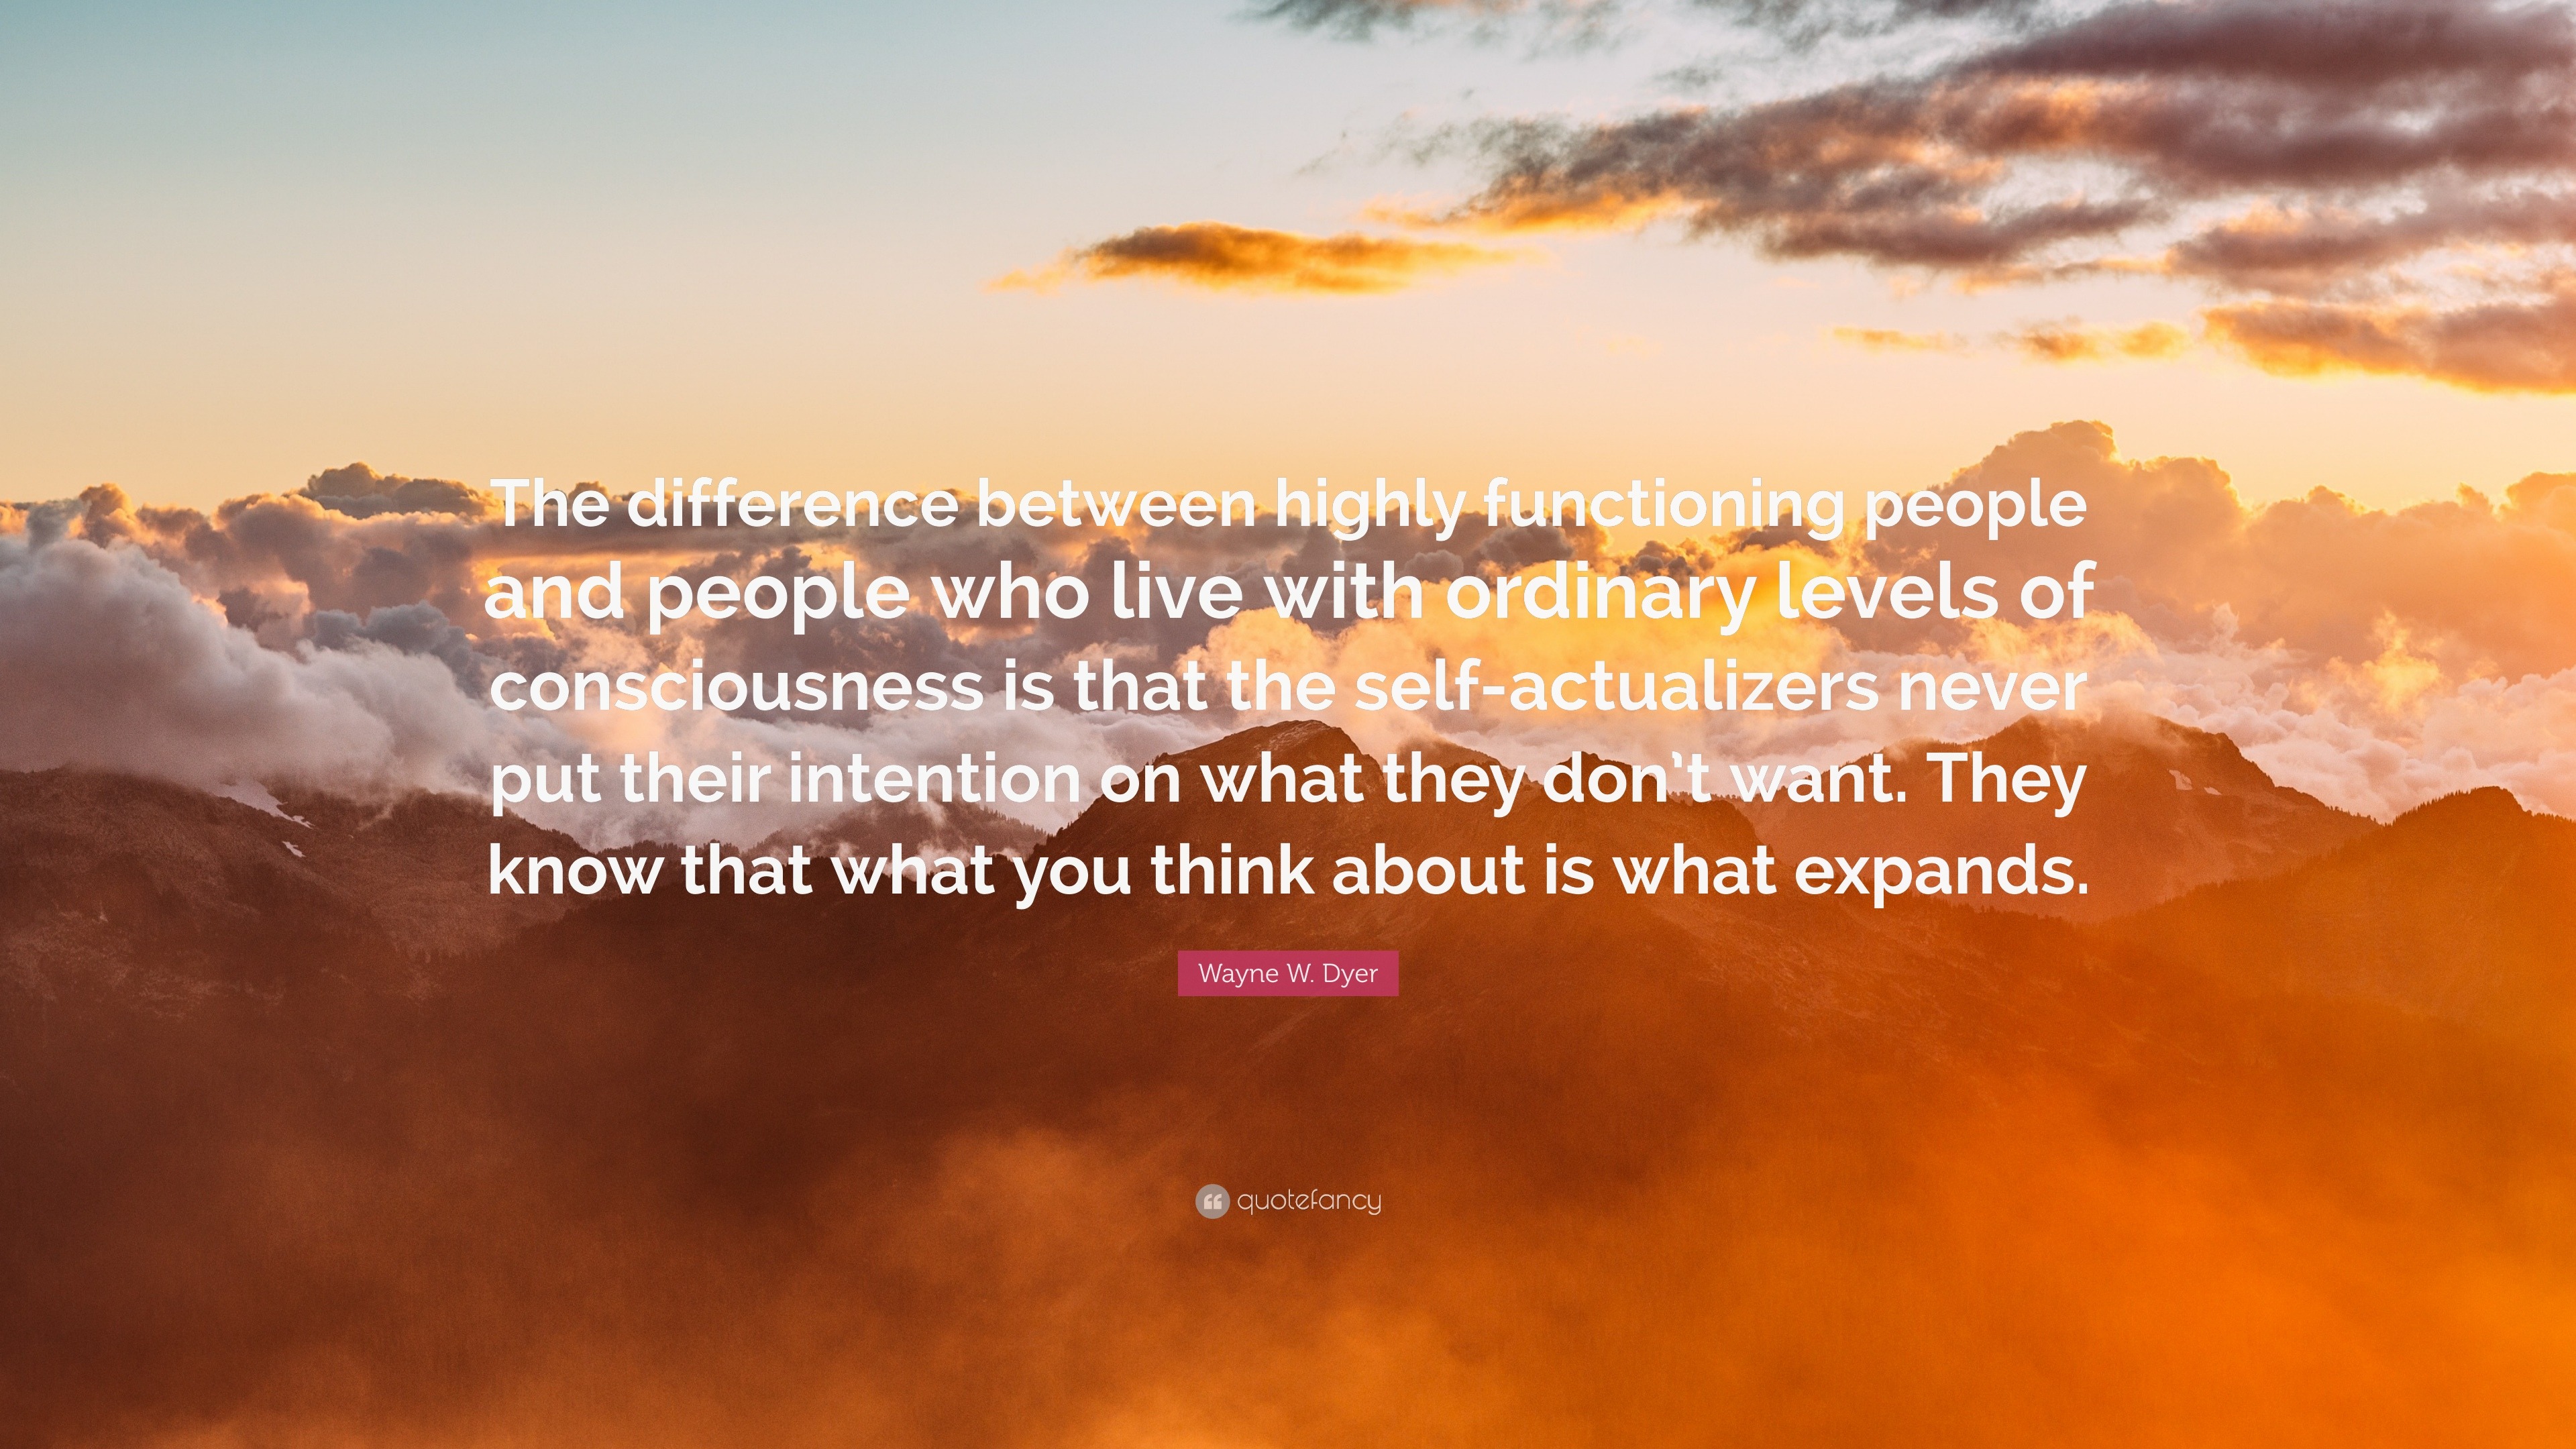 Wayne W. Dyer Quote: “The difference between highly functioning people ...